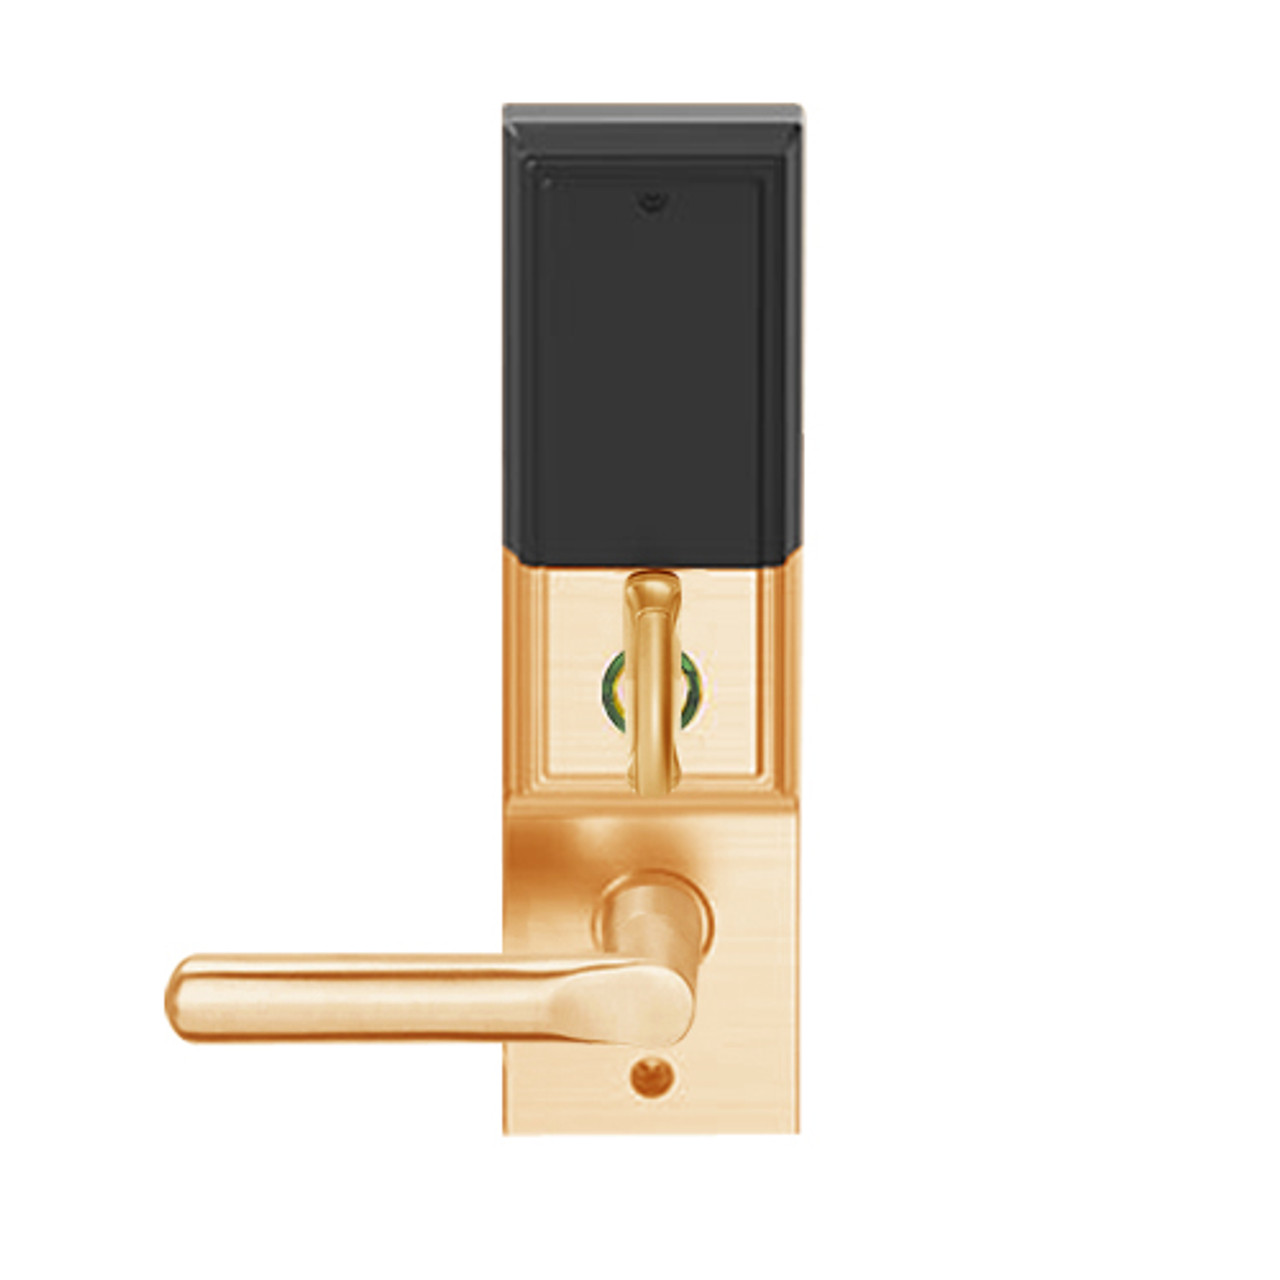 LEMD-ADD-BD-18-612 Schlage Privacy/Apartment Wireless Addison Mortise Deadbolt Lock with LED and 18 Lever Prepped for SFIC in Satin Bronze